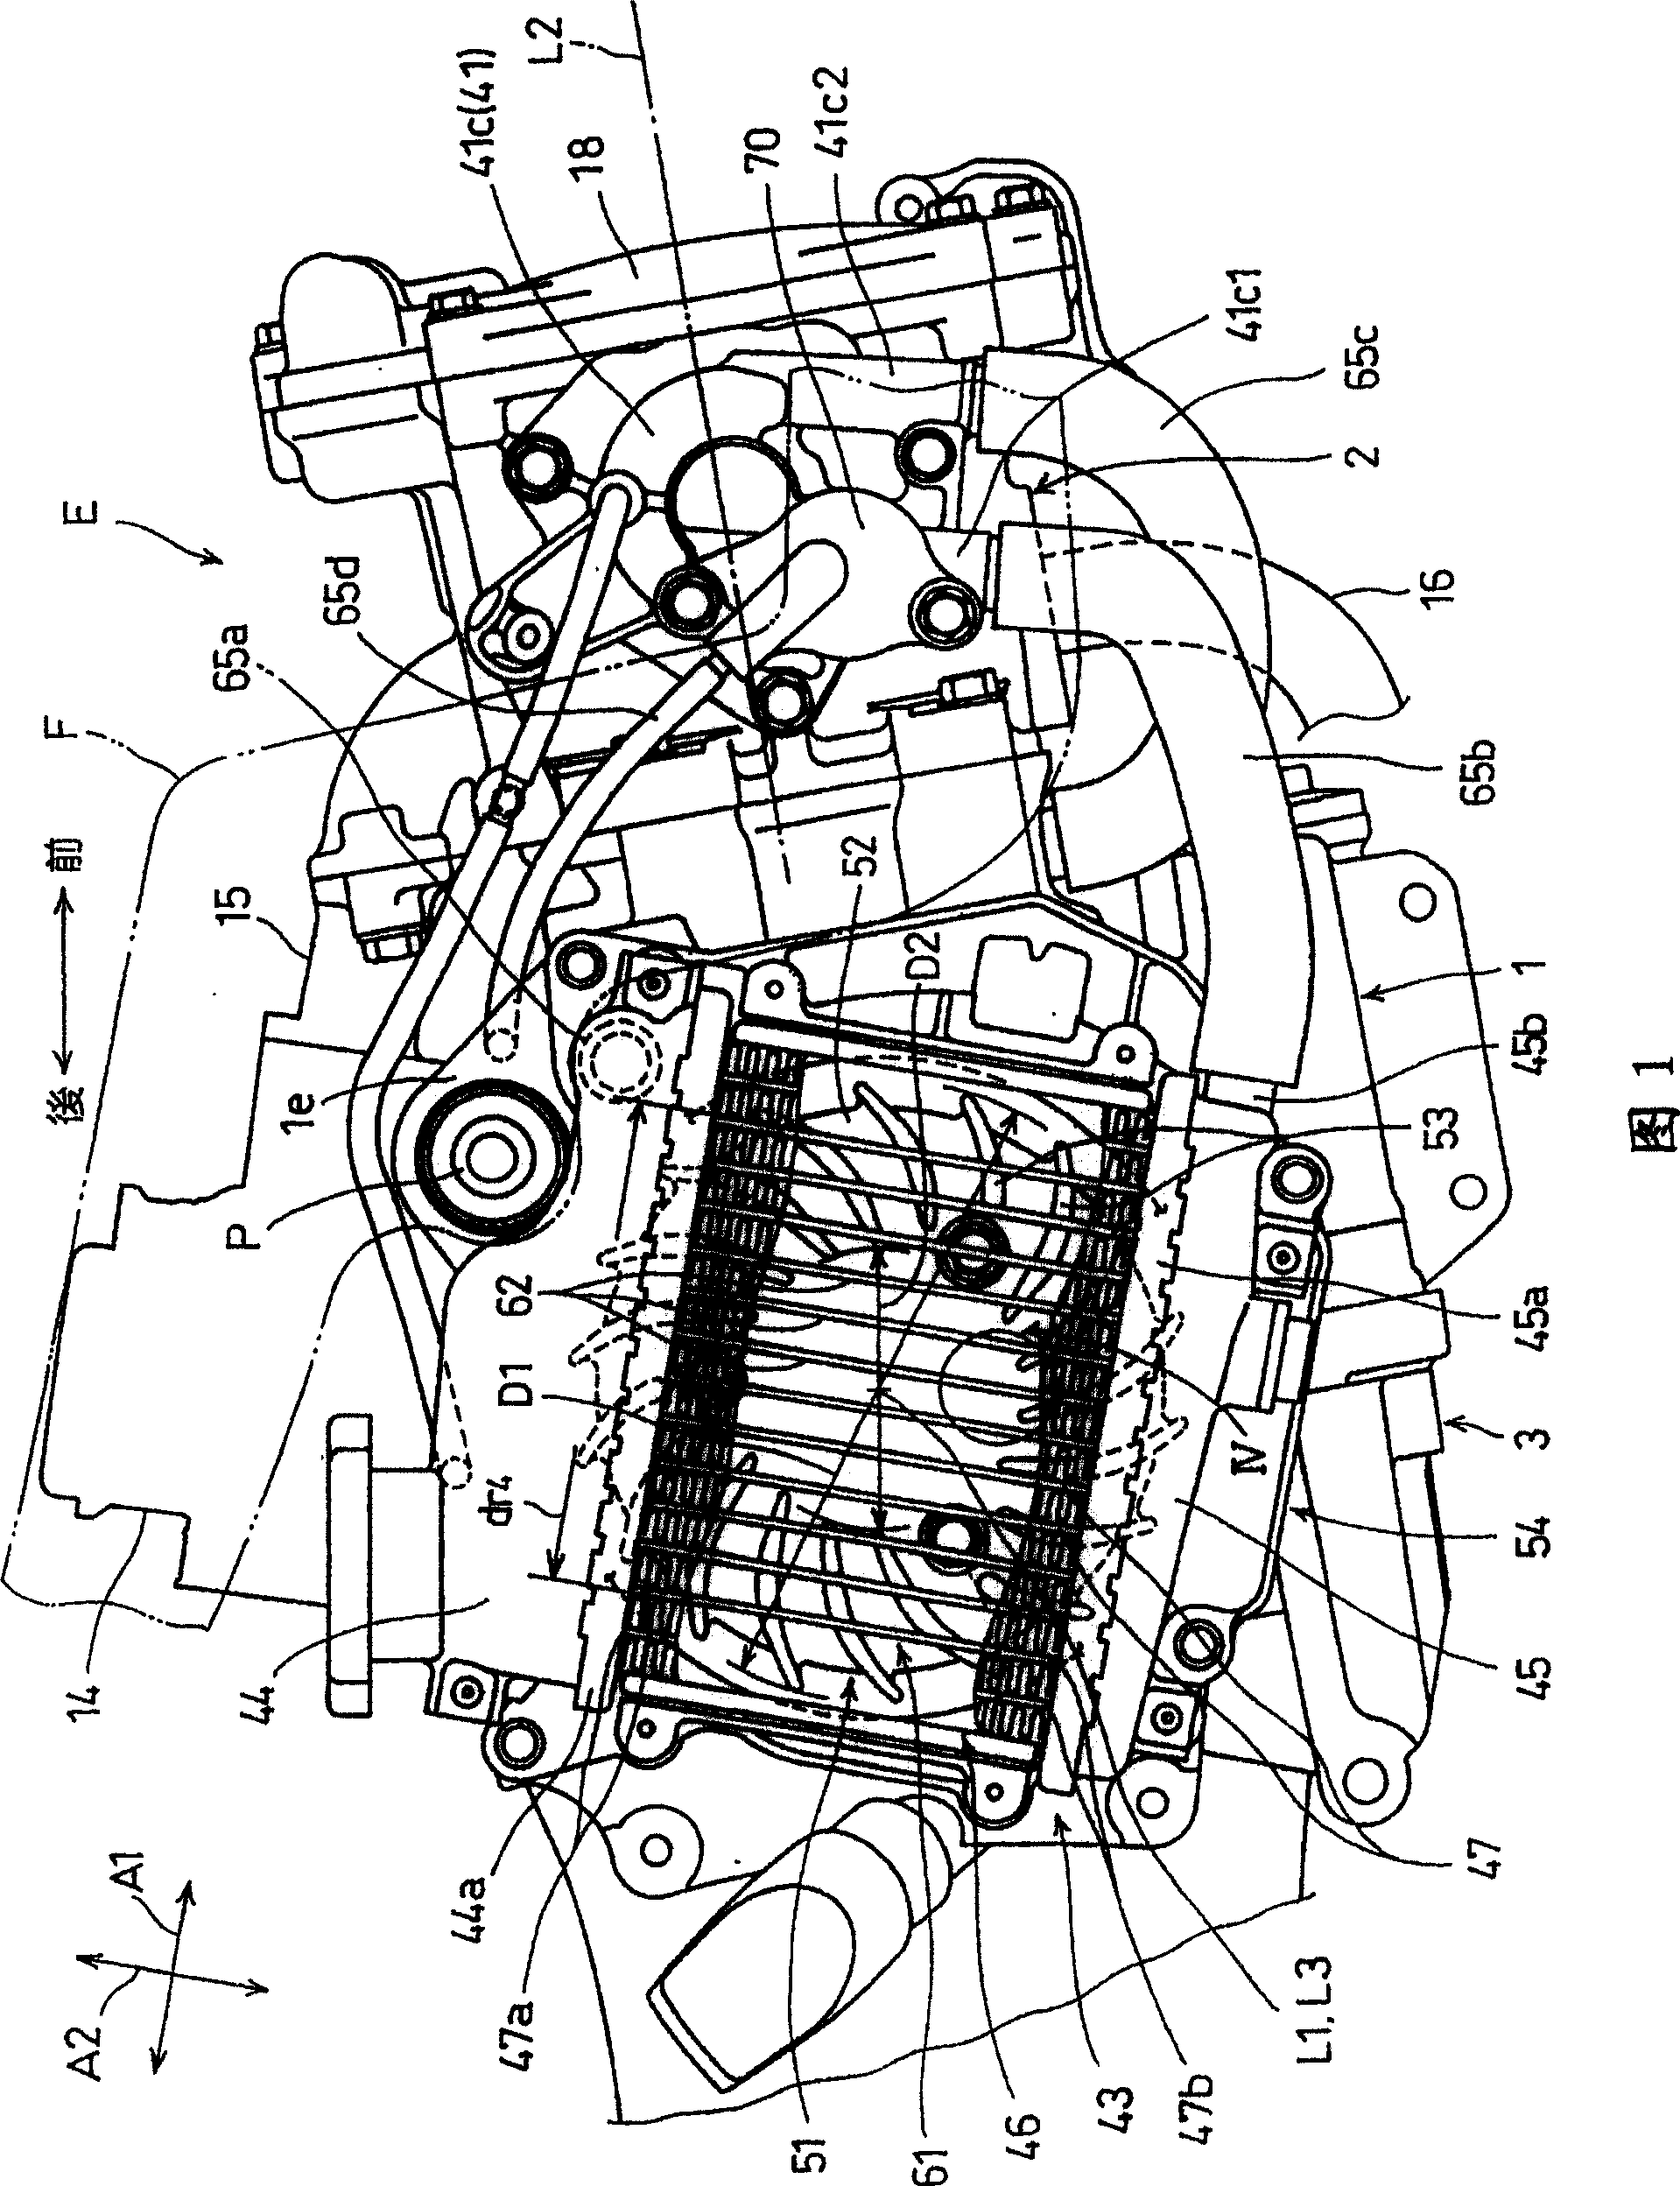 Cooling device with cooling fan